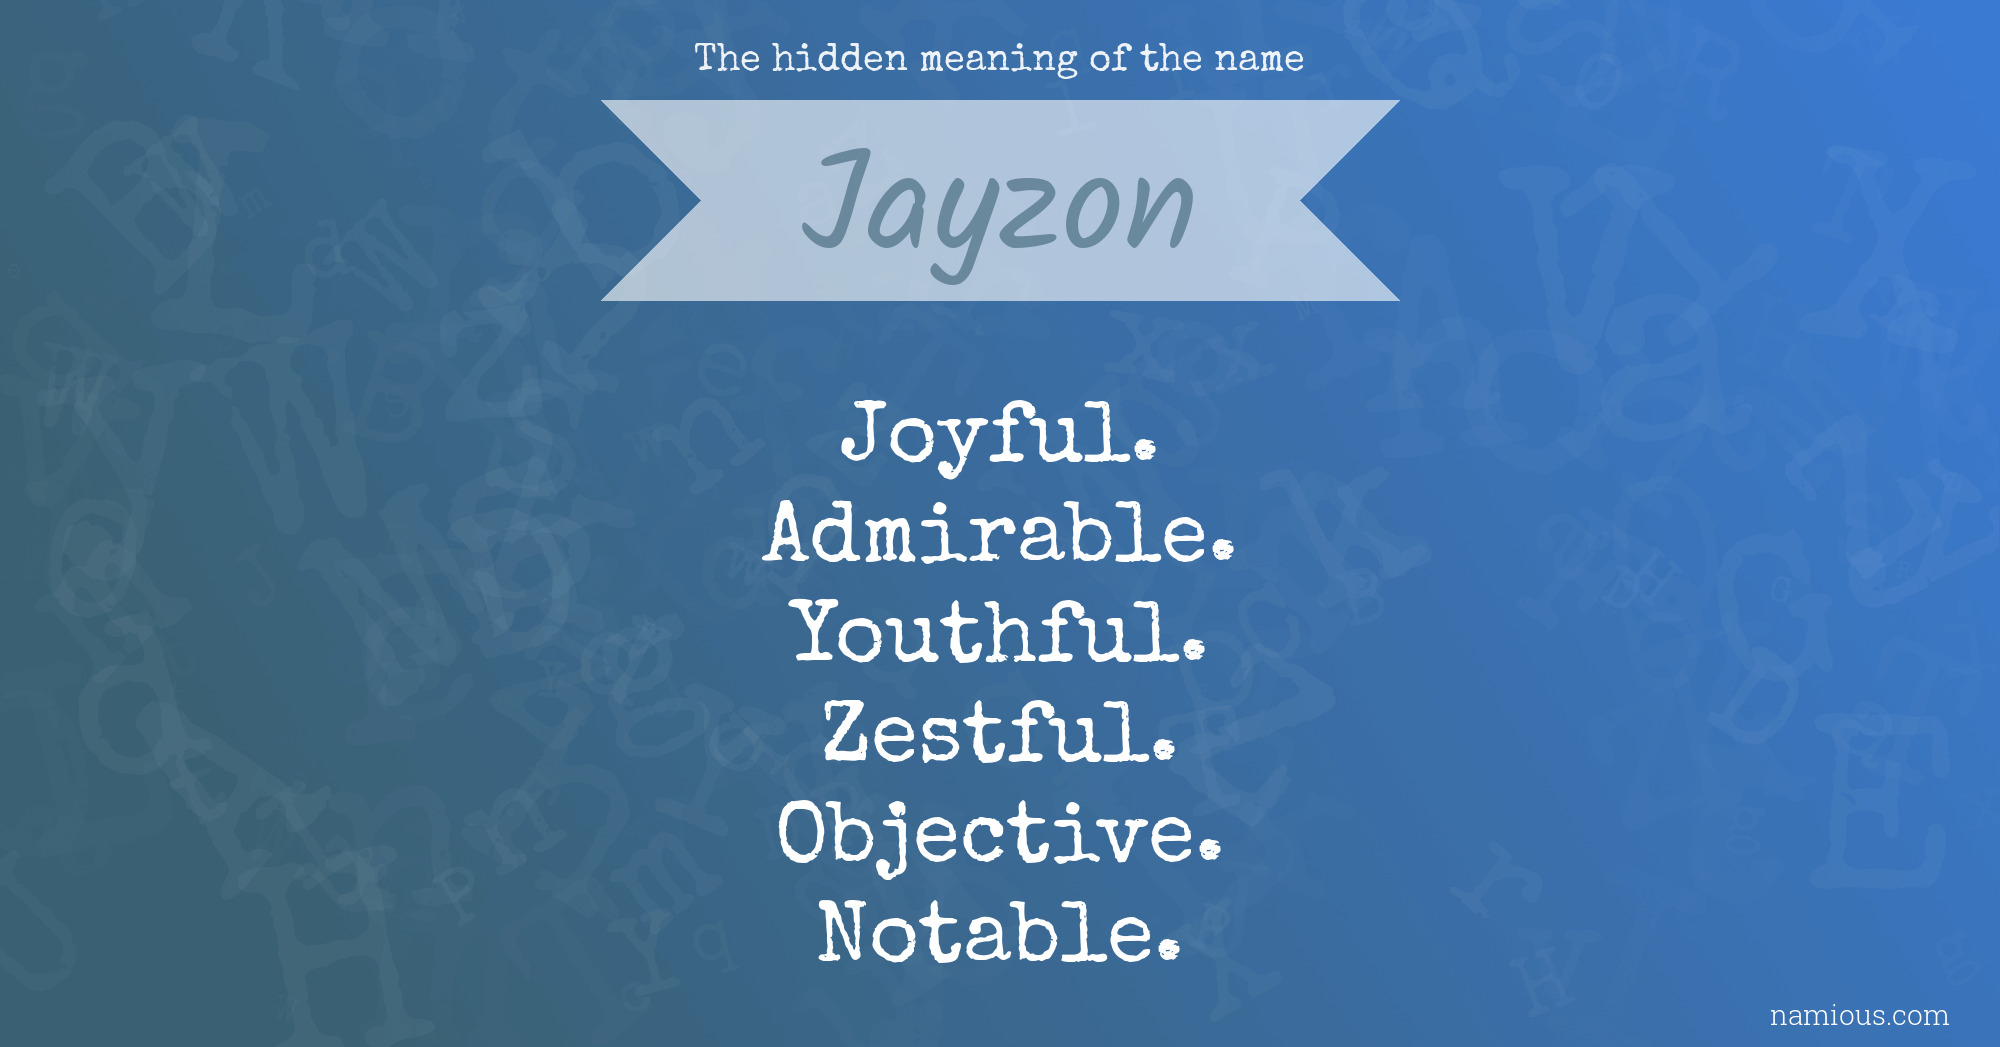 The hidden meaning of the name Jayzon